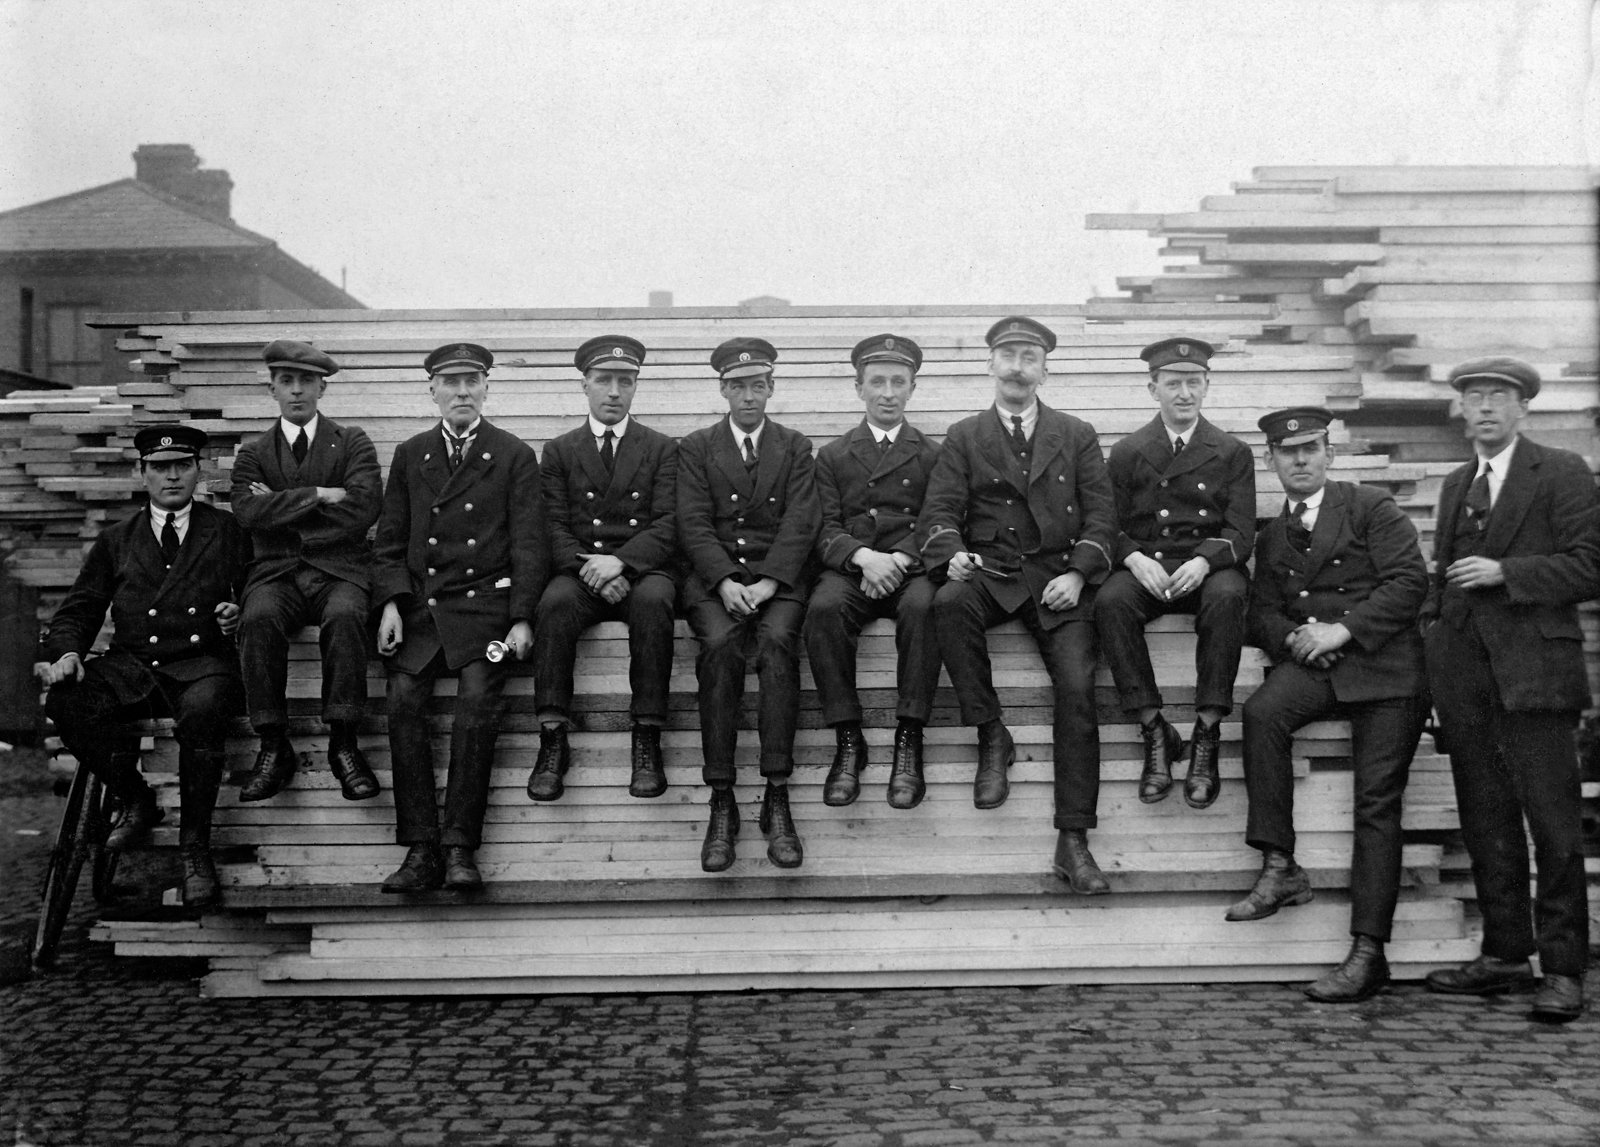 Joseph Thuillier (Ian’s grandfather), fourth from the right. He worked as a Customs Officer at North Wall, Dublin, 1942.